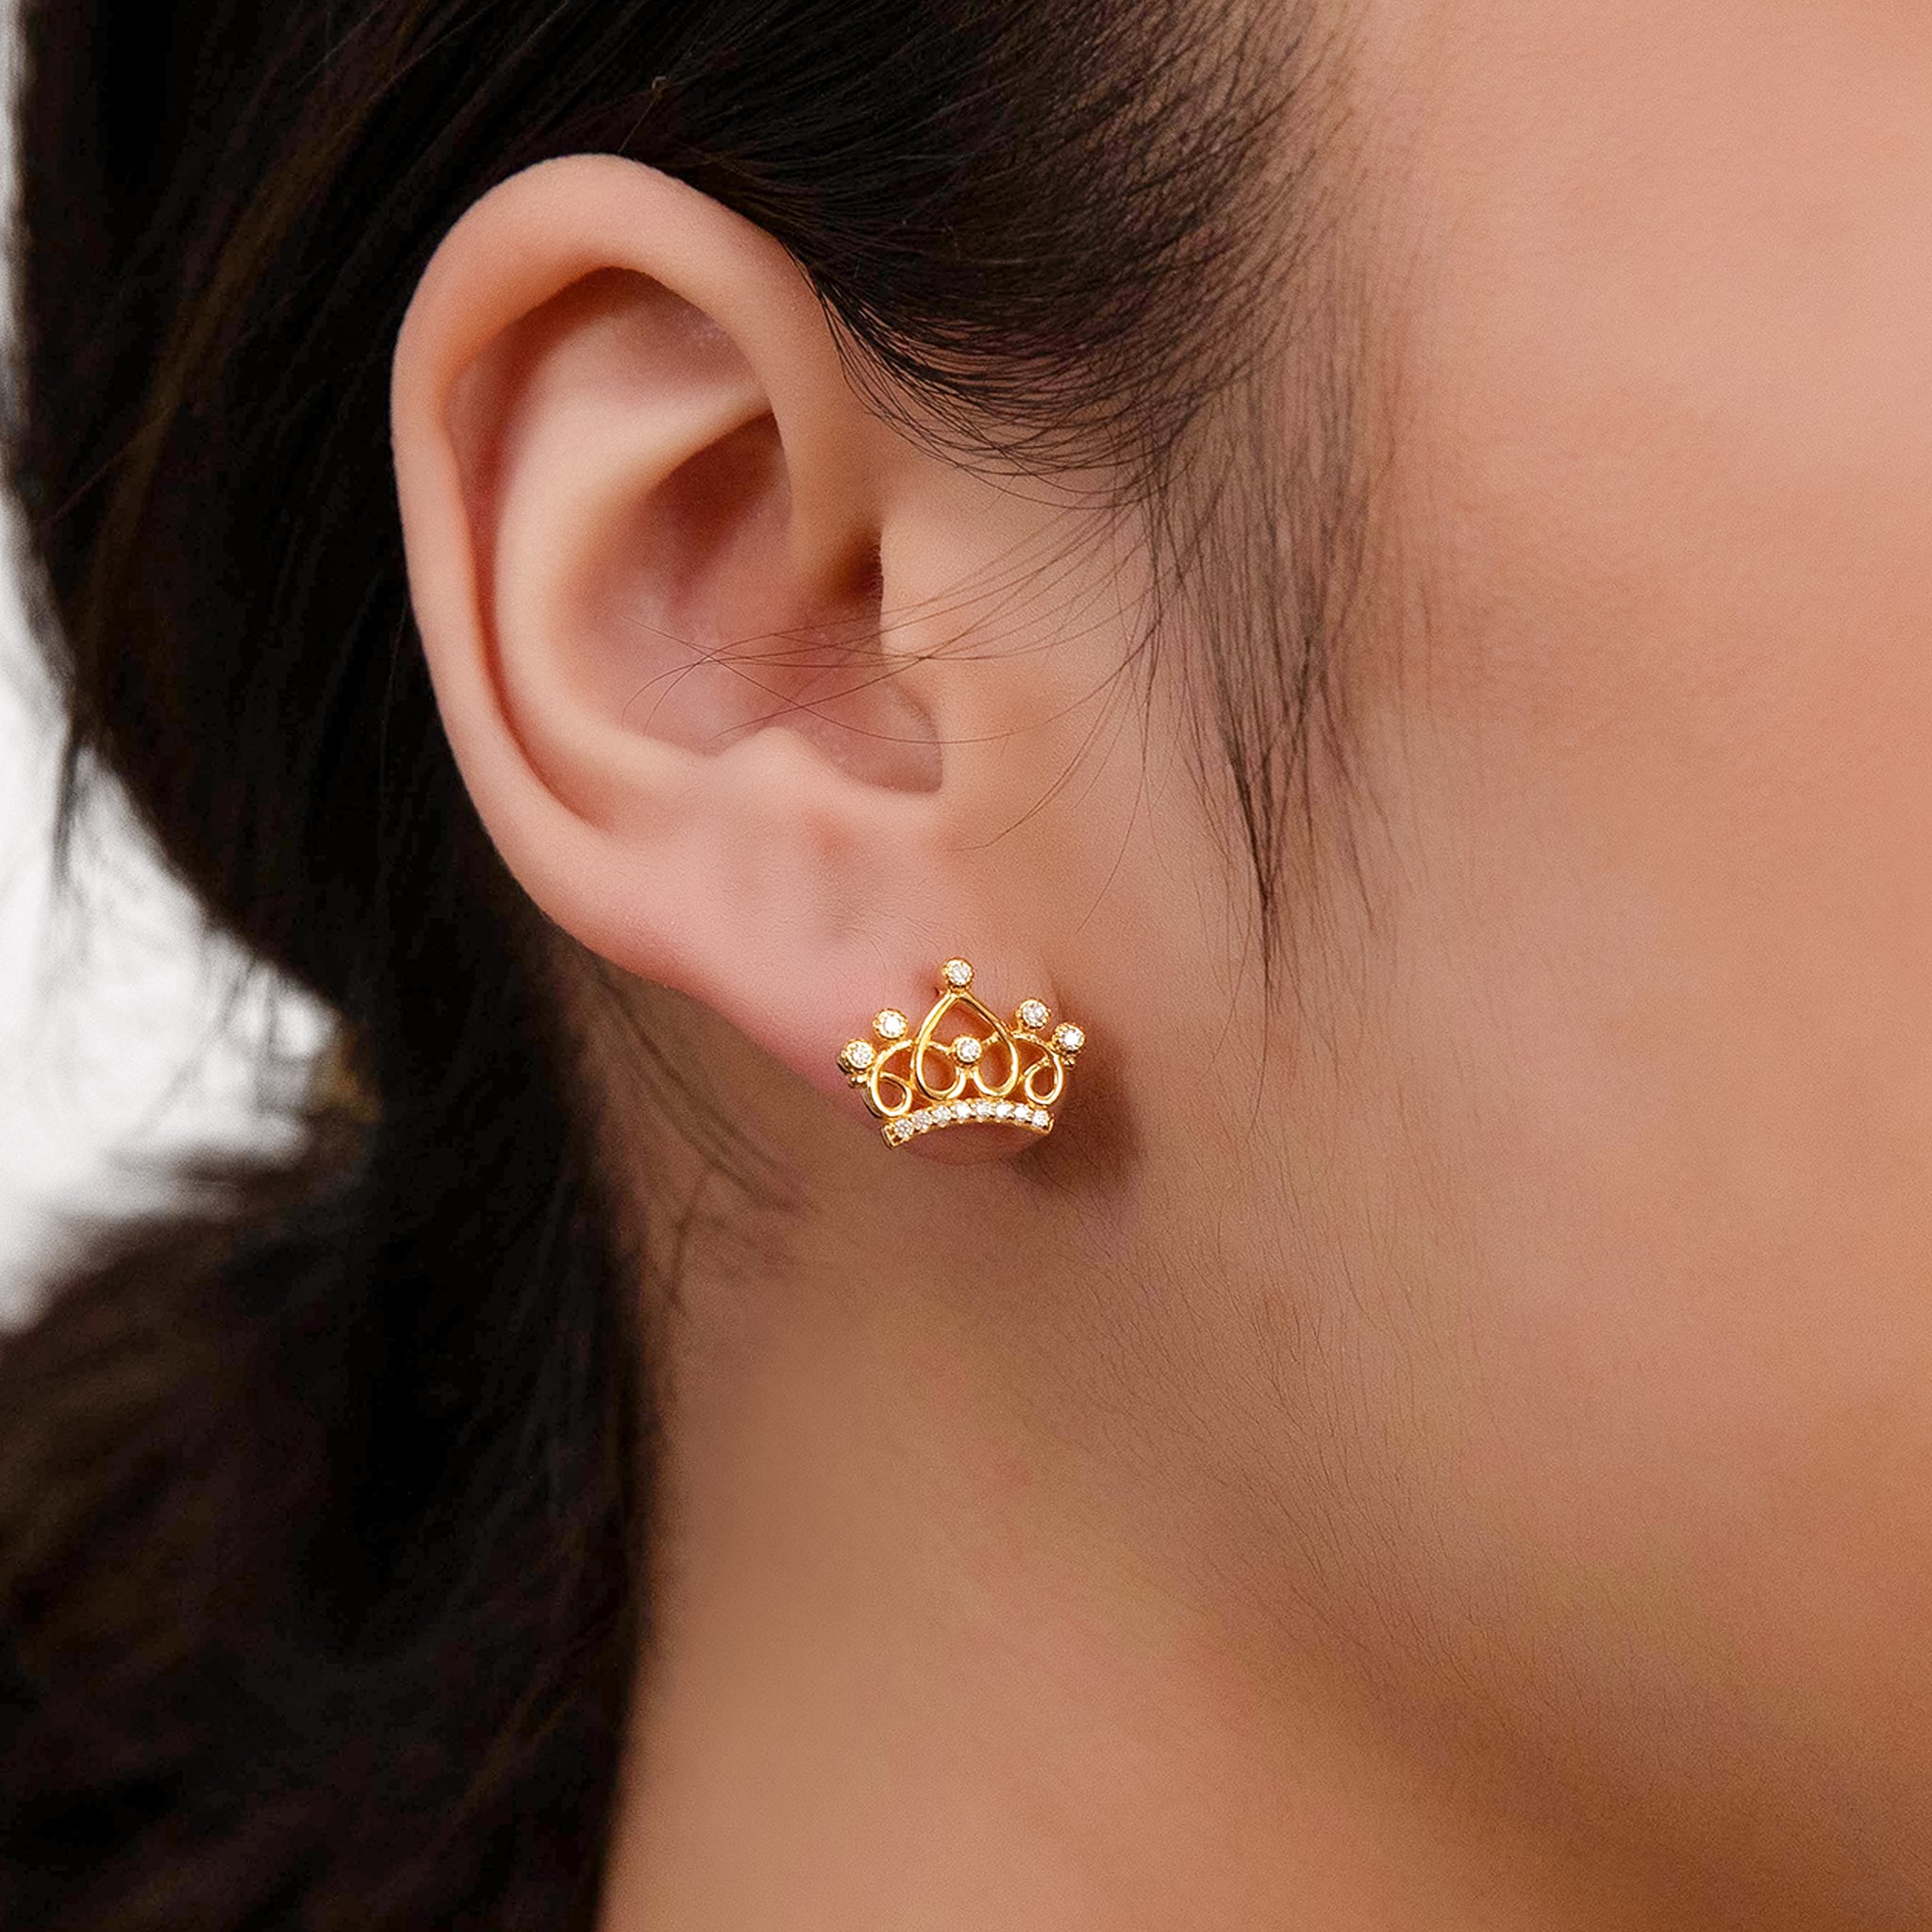 Share 119+ gold crown earrings